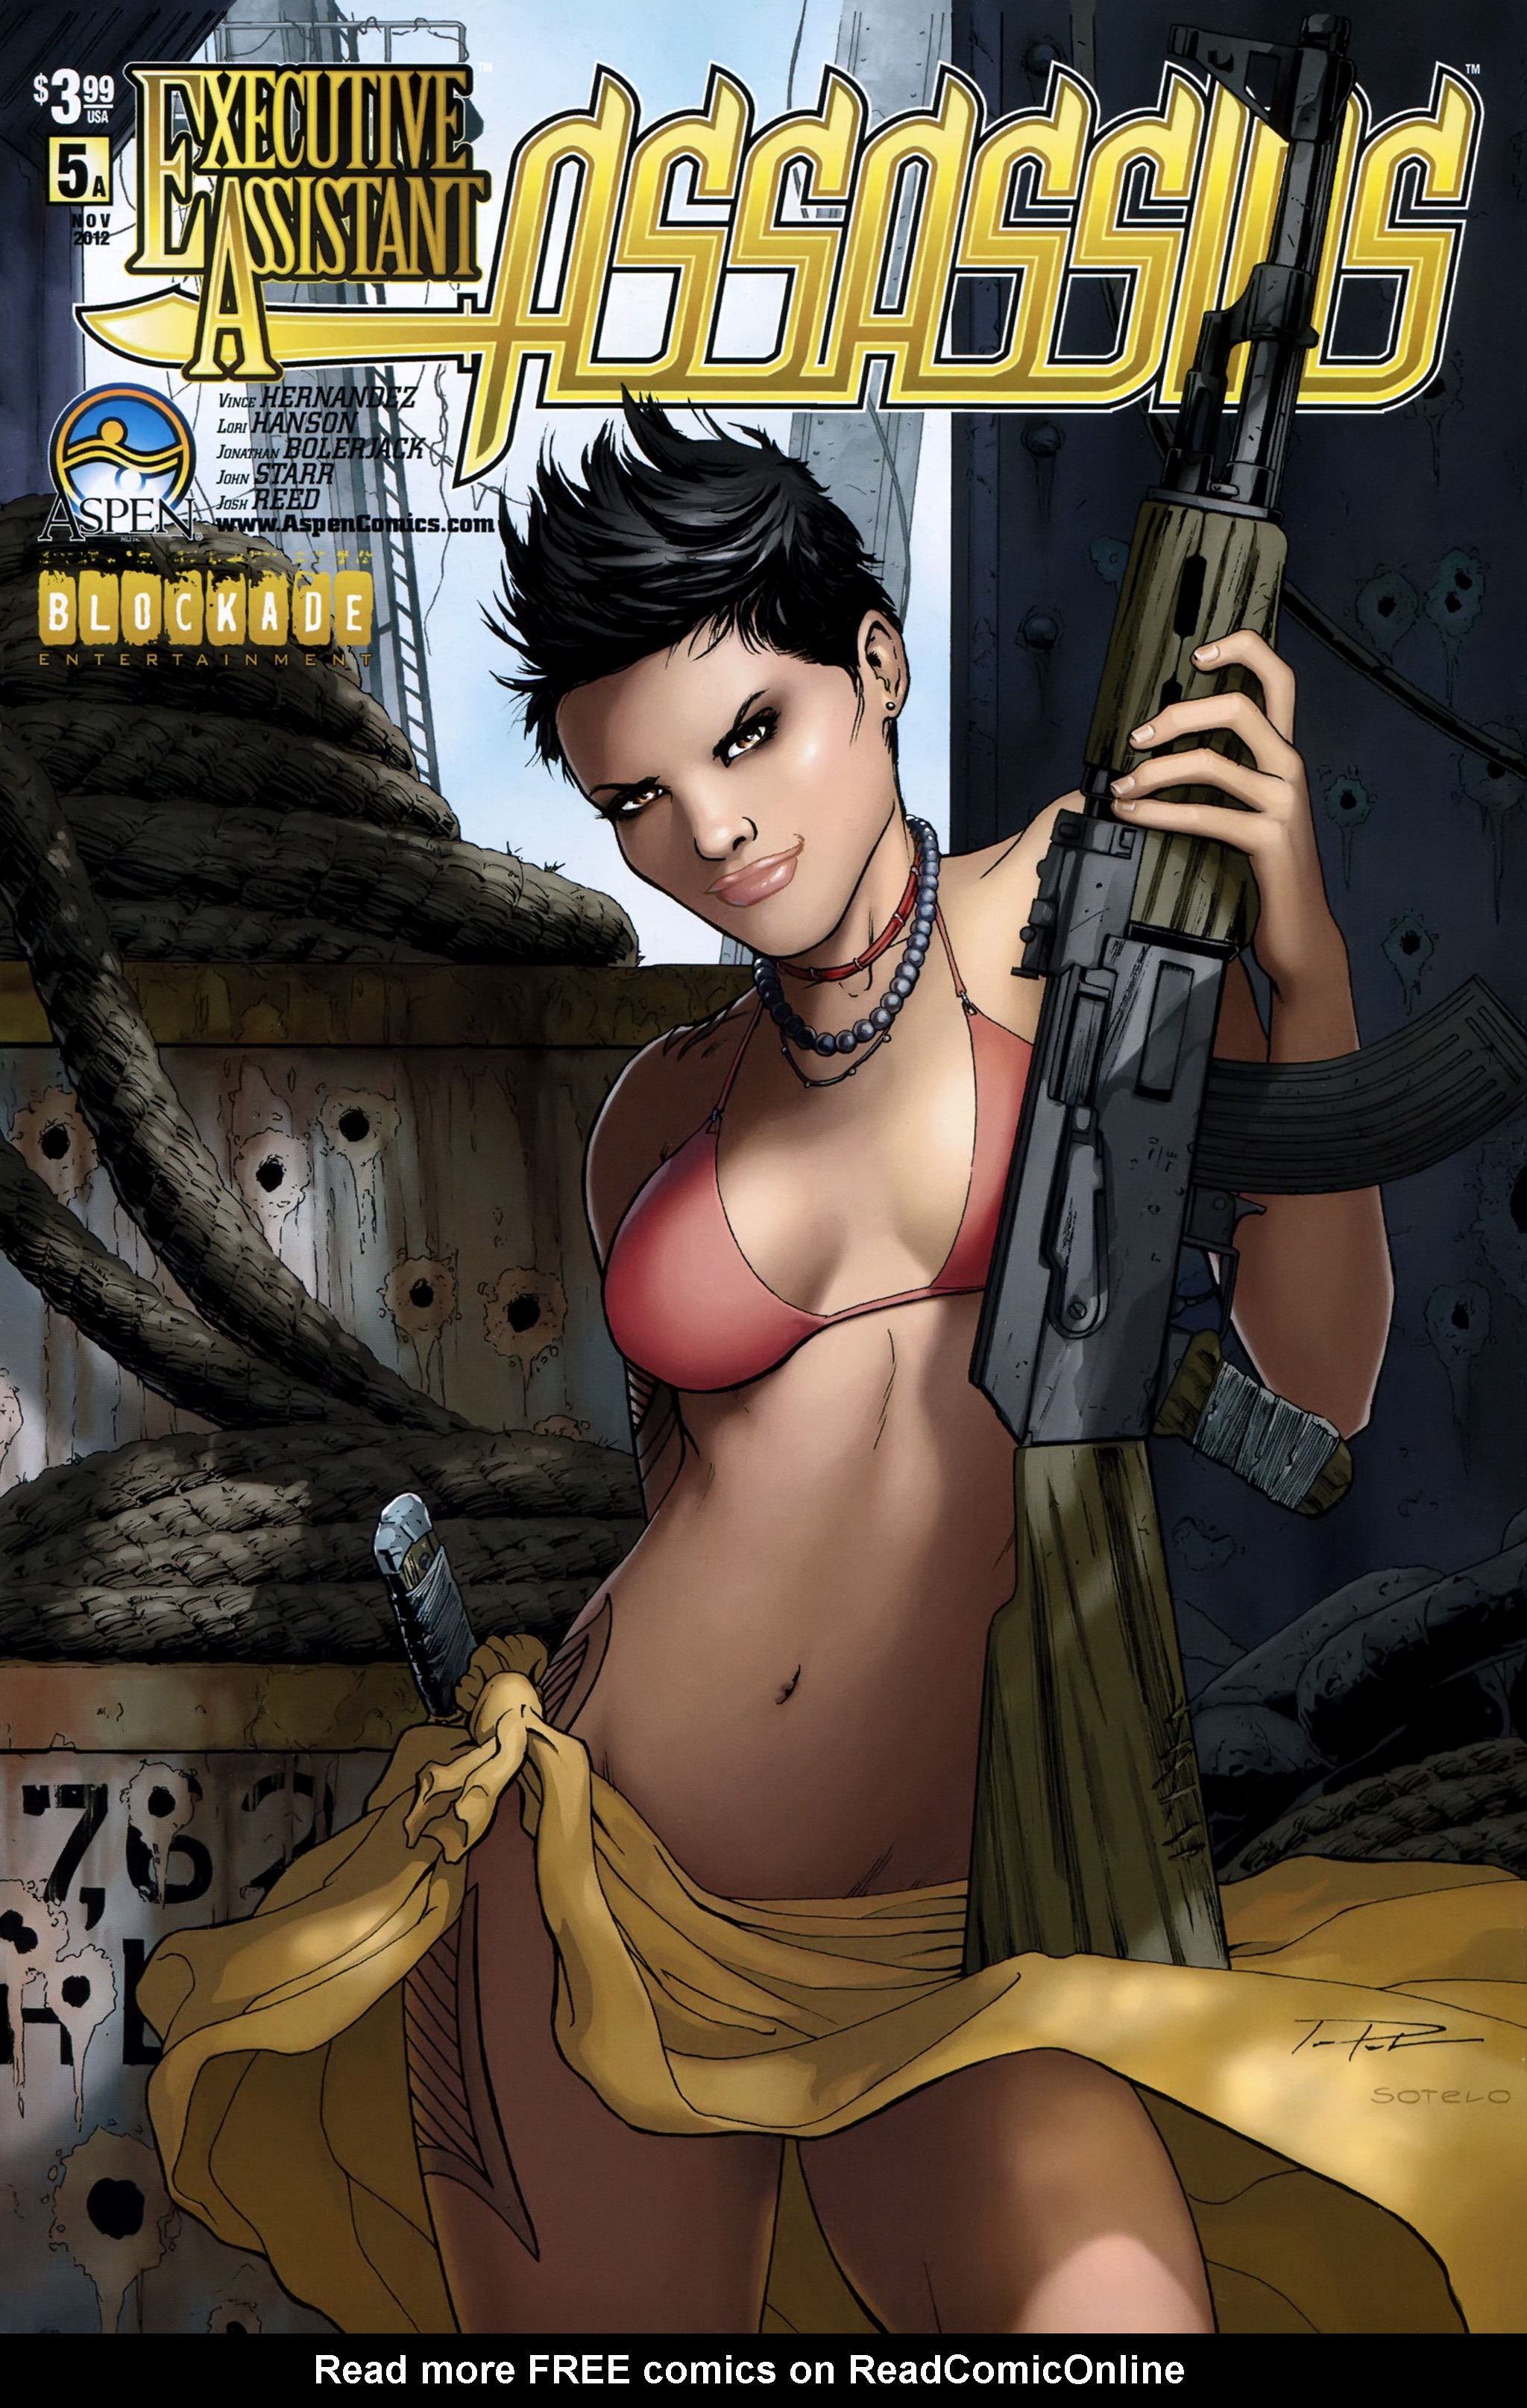 Read online Executive Assistant: Assassins comic -  Issue #5 - 1